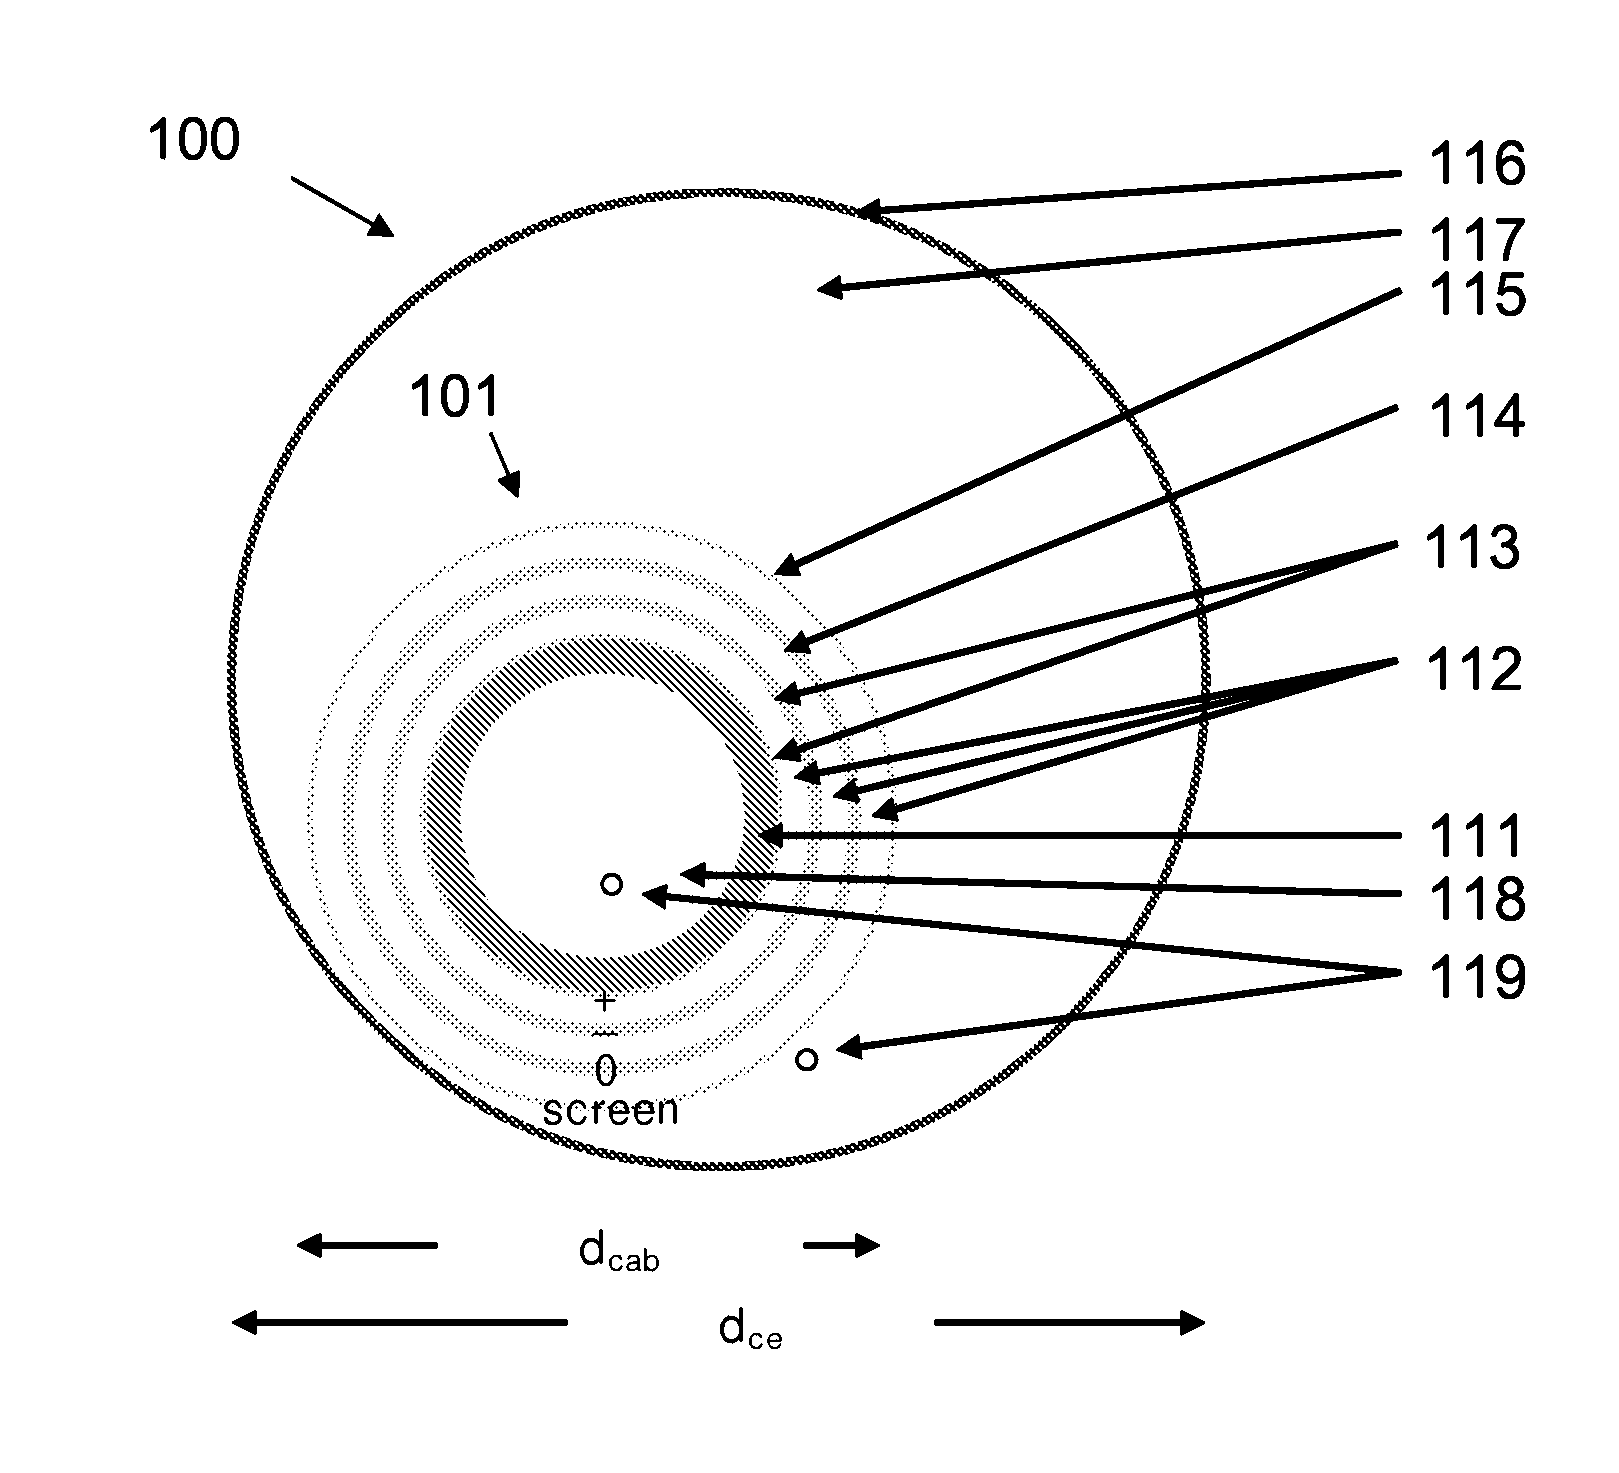 Susperconductive Multi-Phase Cable System, a Method of Its Manufacture and Its Use